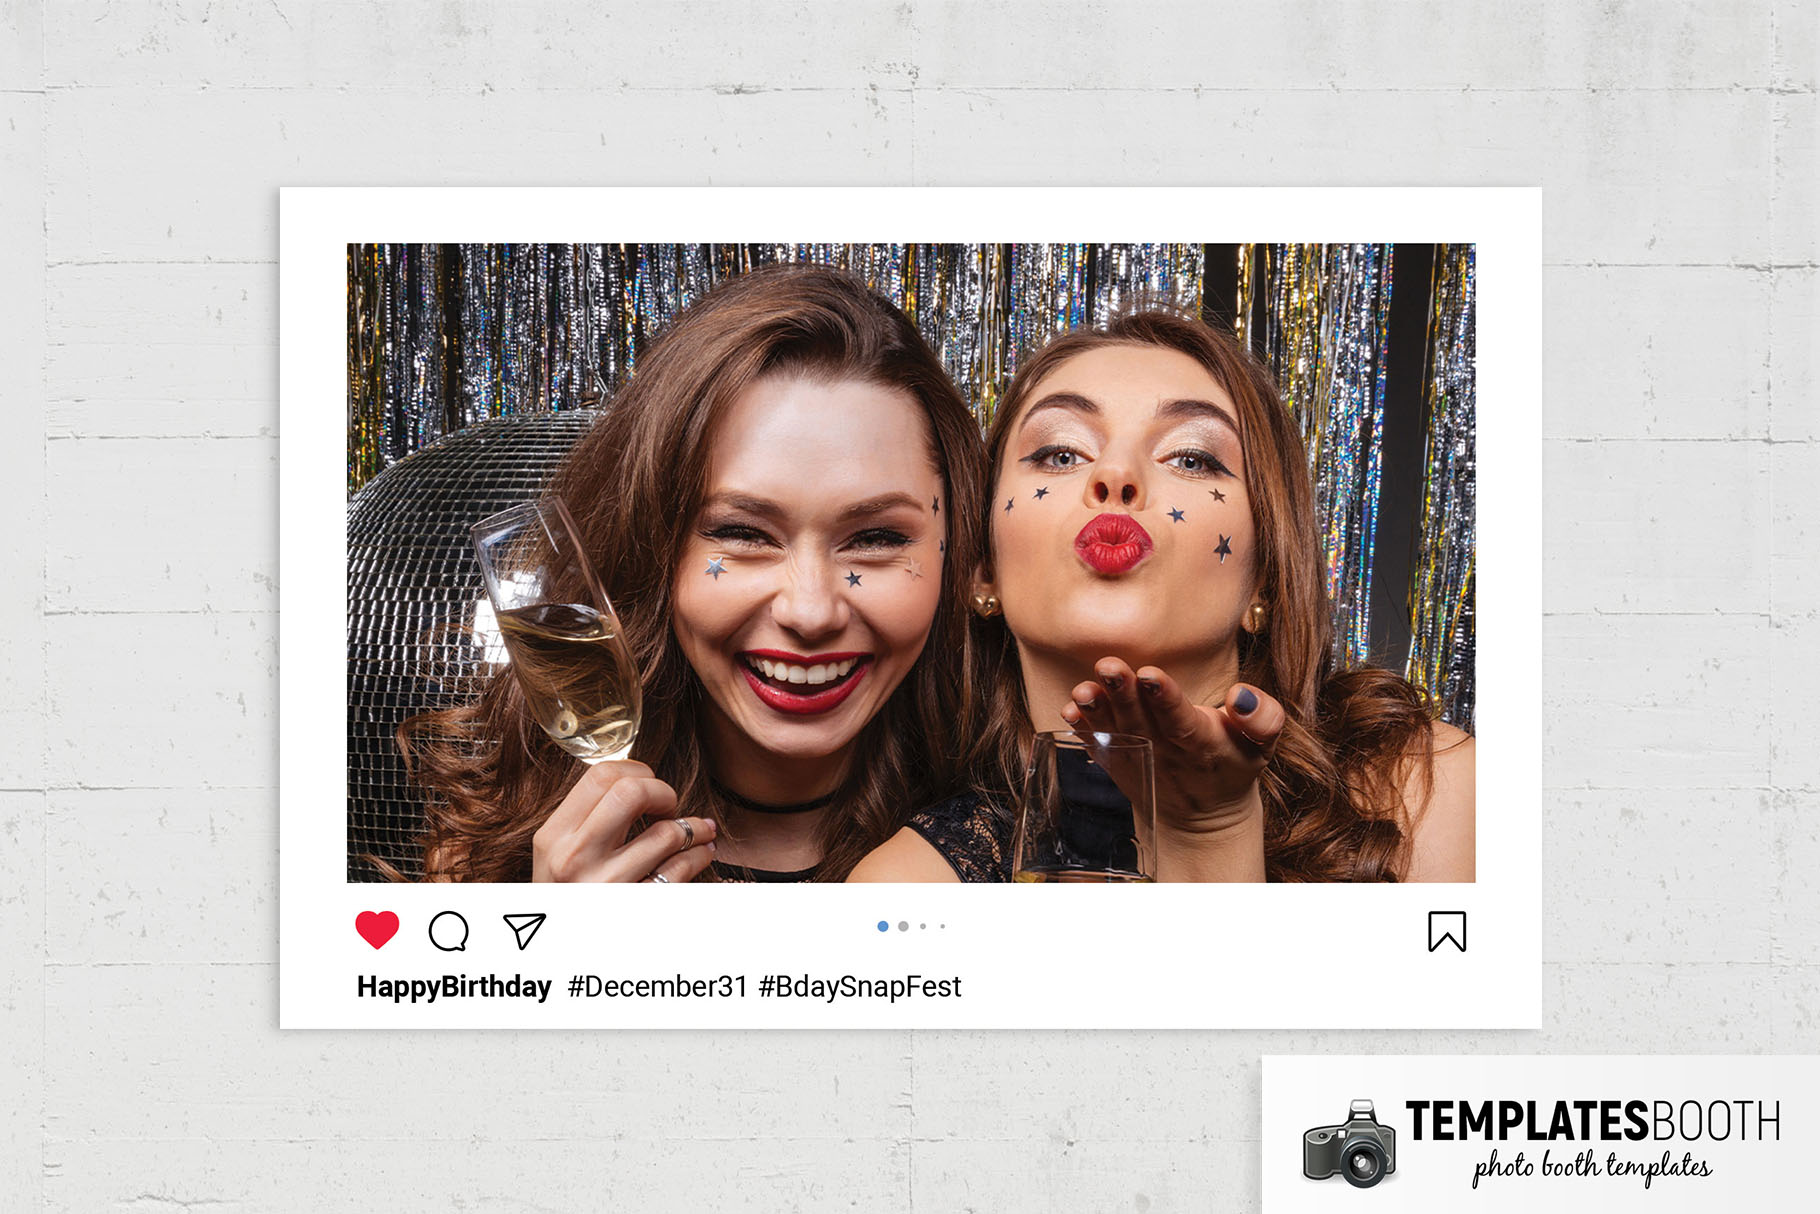 Instagram Themed Photo Booth Template